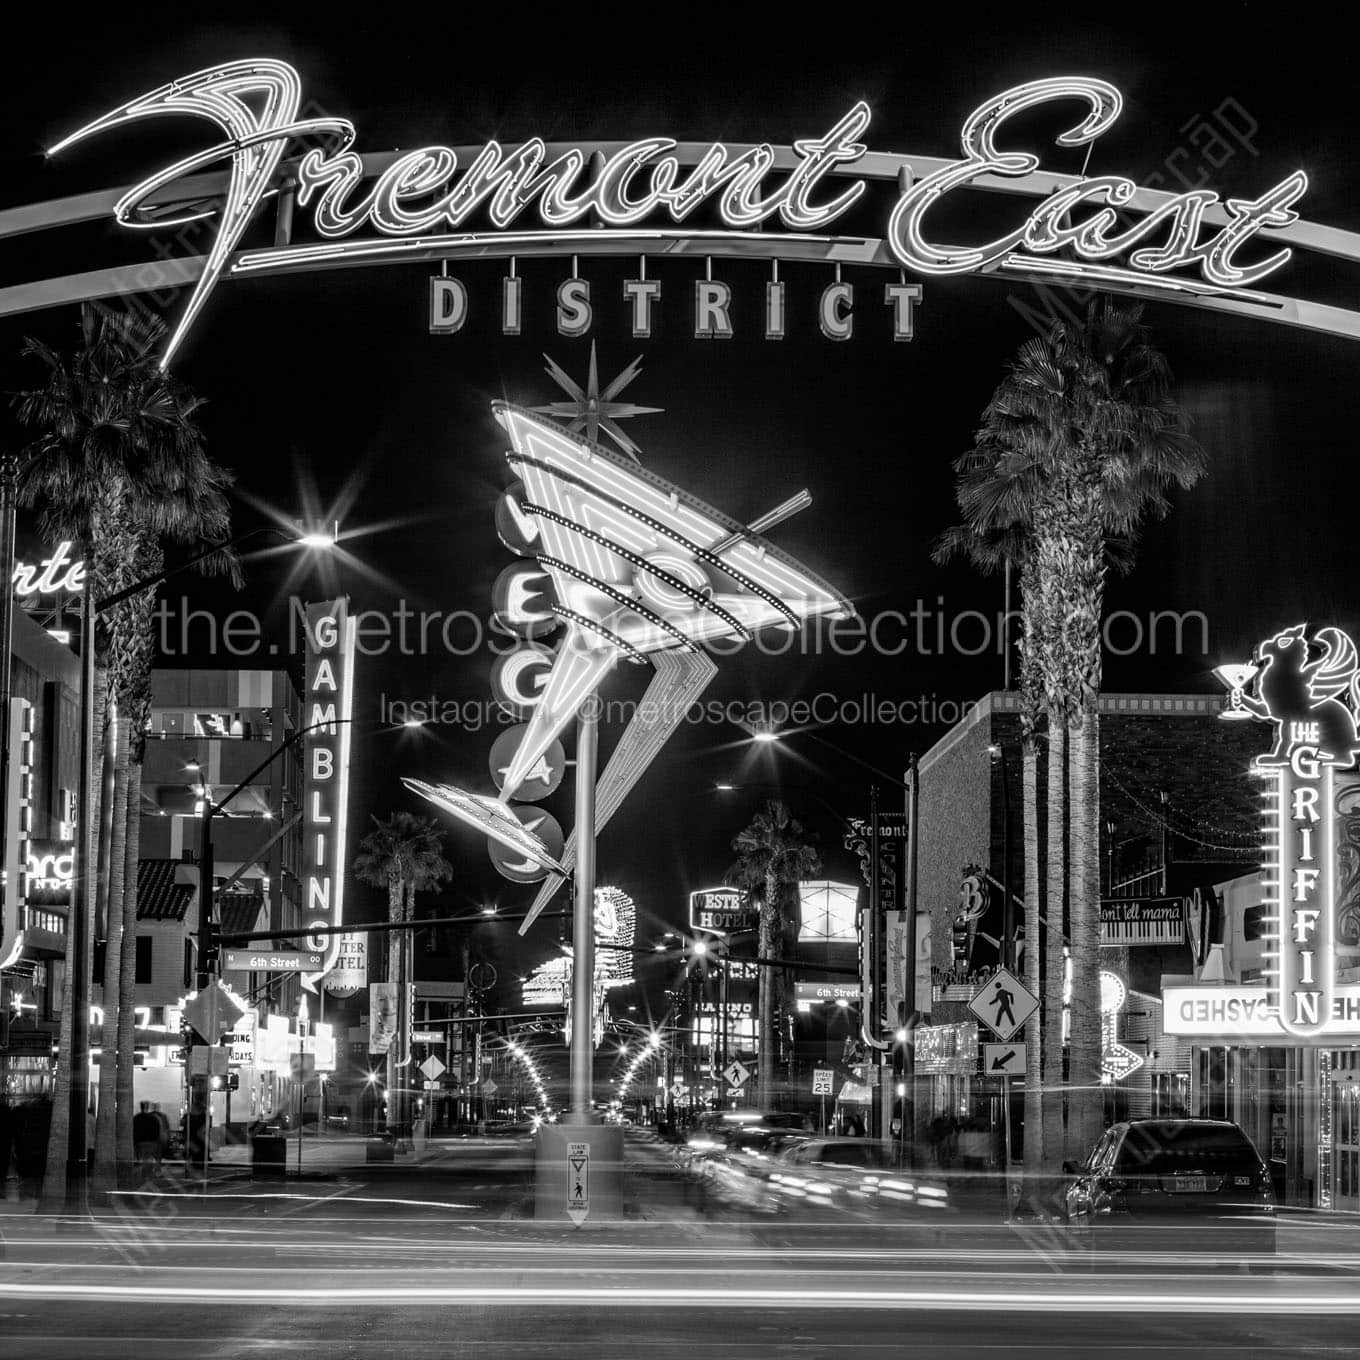 fremont east district at night Black & White Office Art